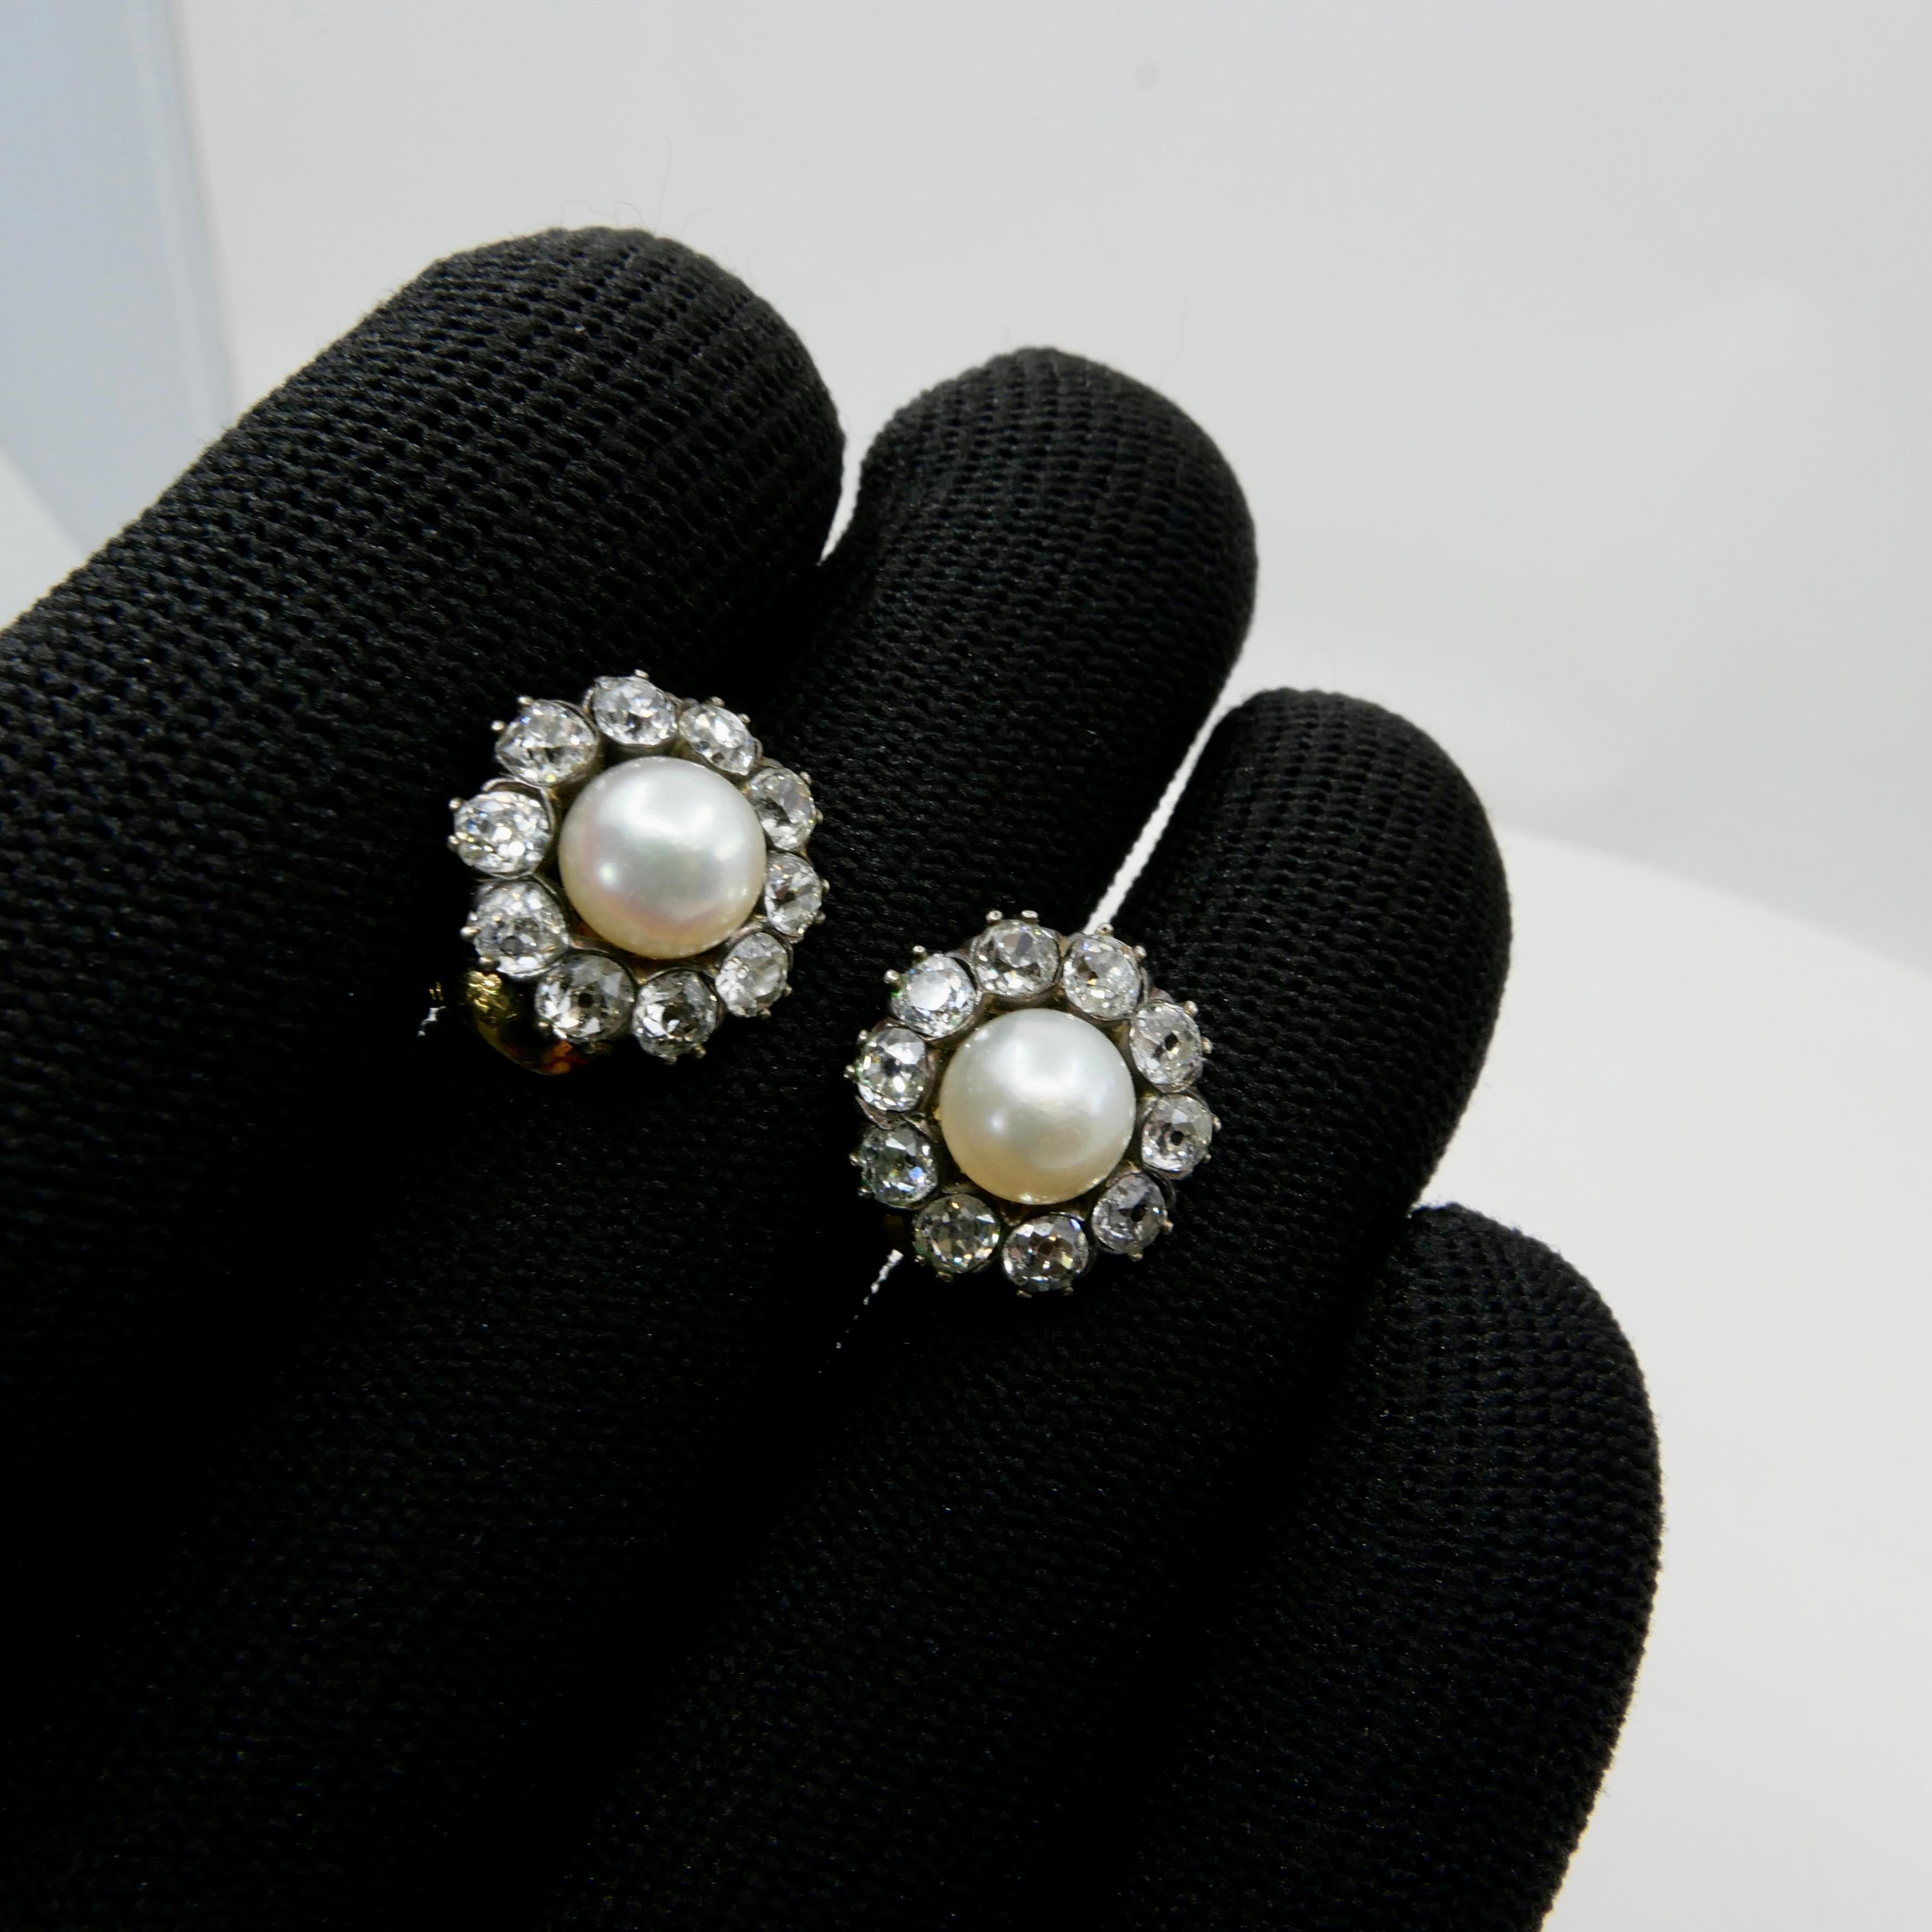 Round Cut Antique Natural Pearl & Old Cut Diamond Earrings. French Assay & Maker Mark.